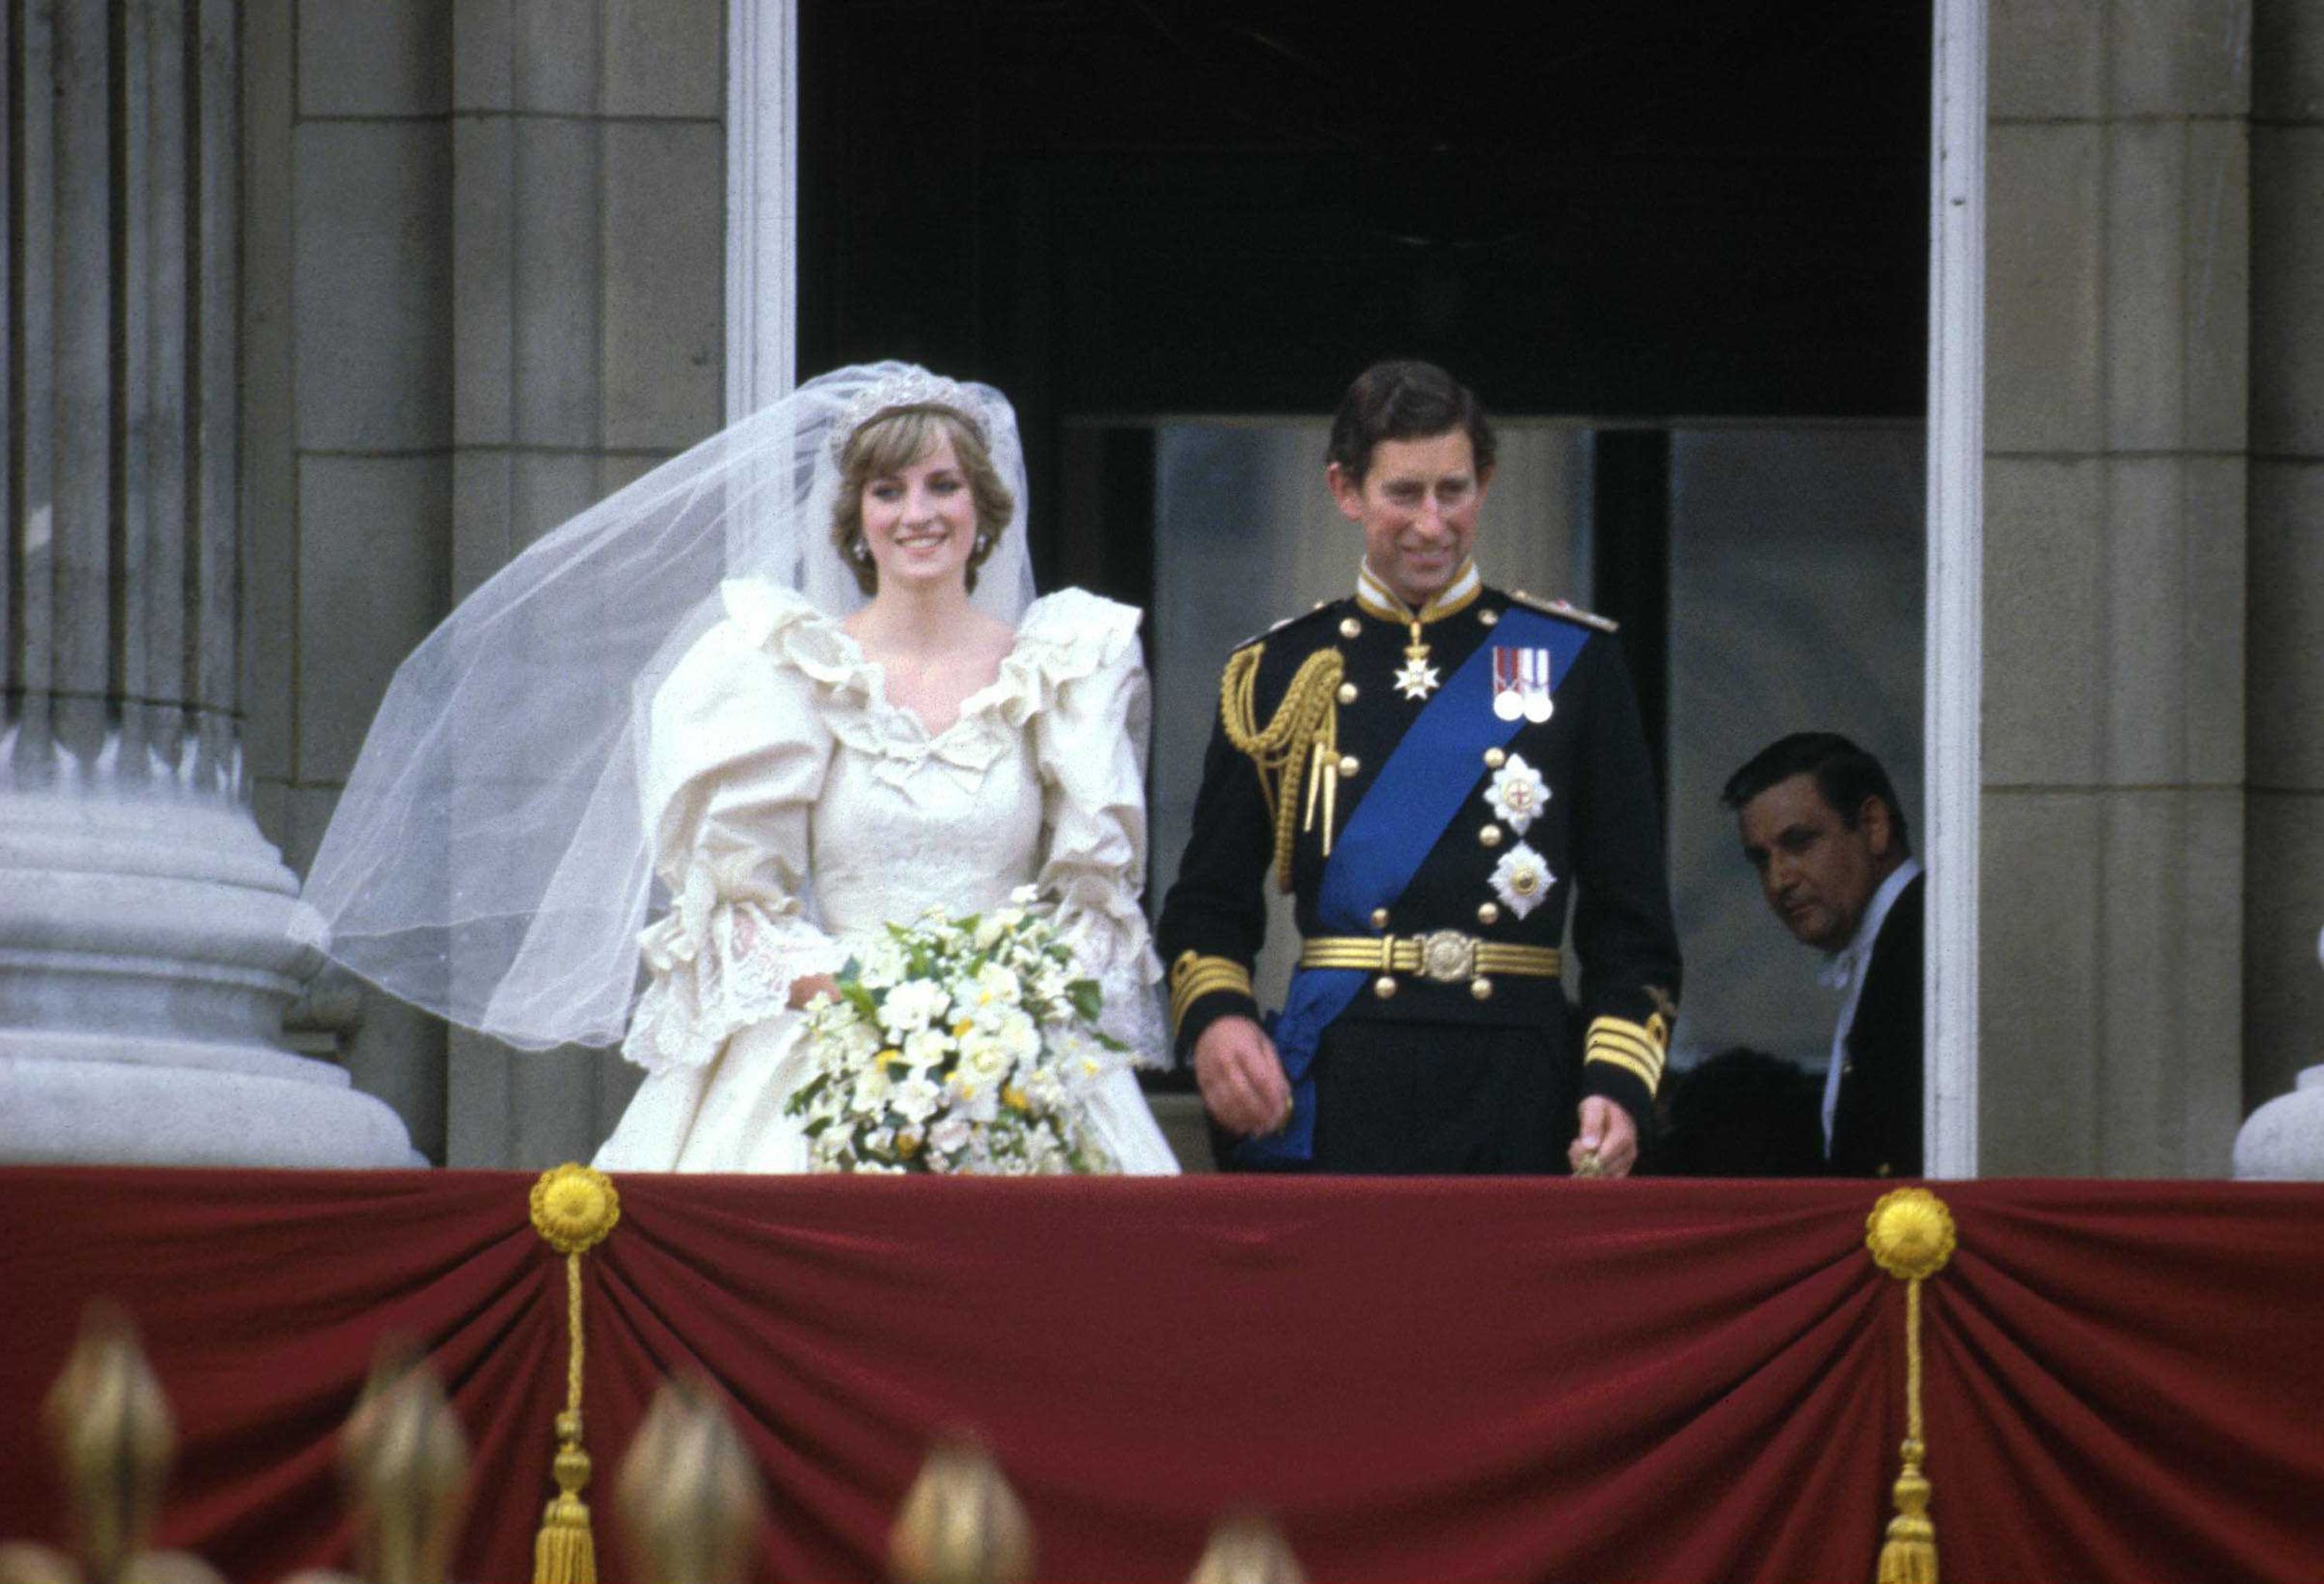 Princess Diana and Prince Charles on the balcony of Buckingham Palace after their wedding ceremony at St. Paul's Cathedral in London, England on July 29, 1981 | Photo: Getty Images